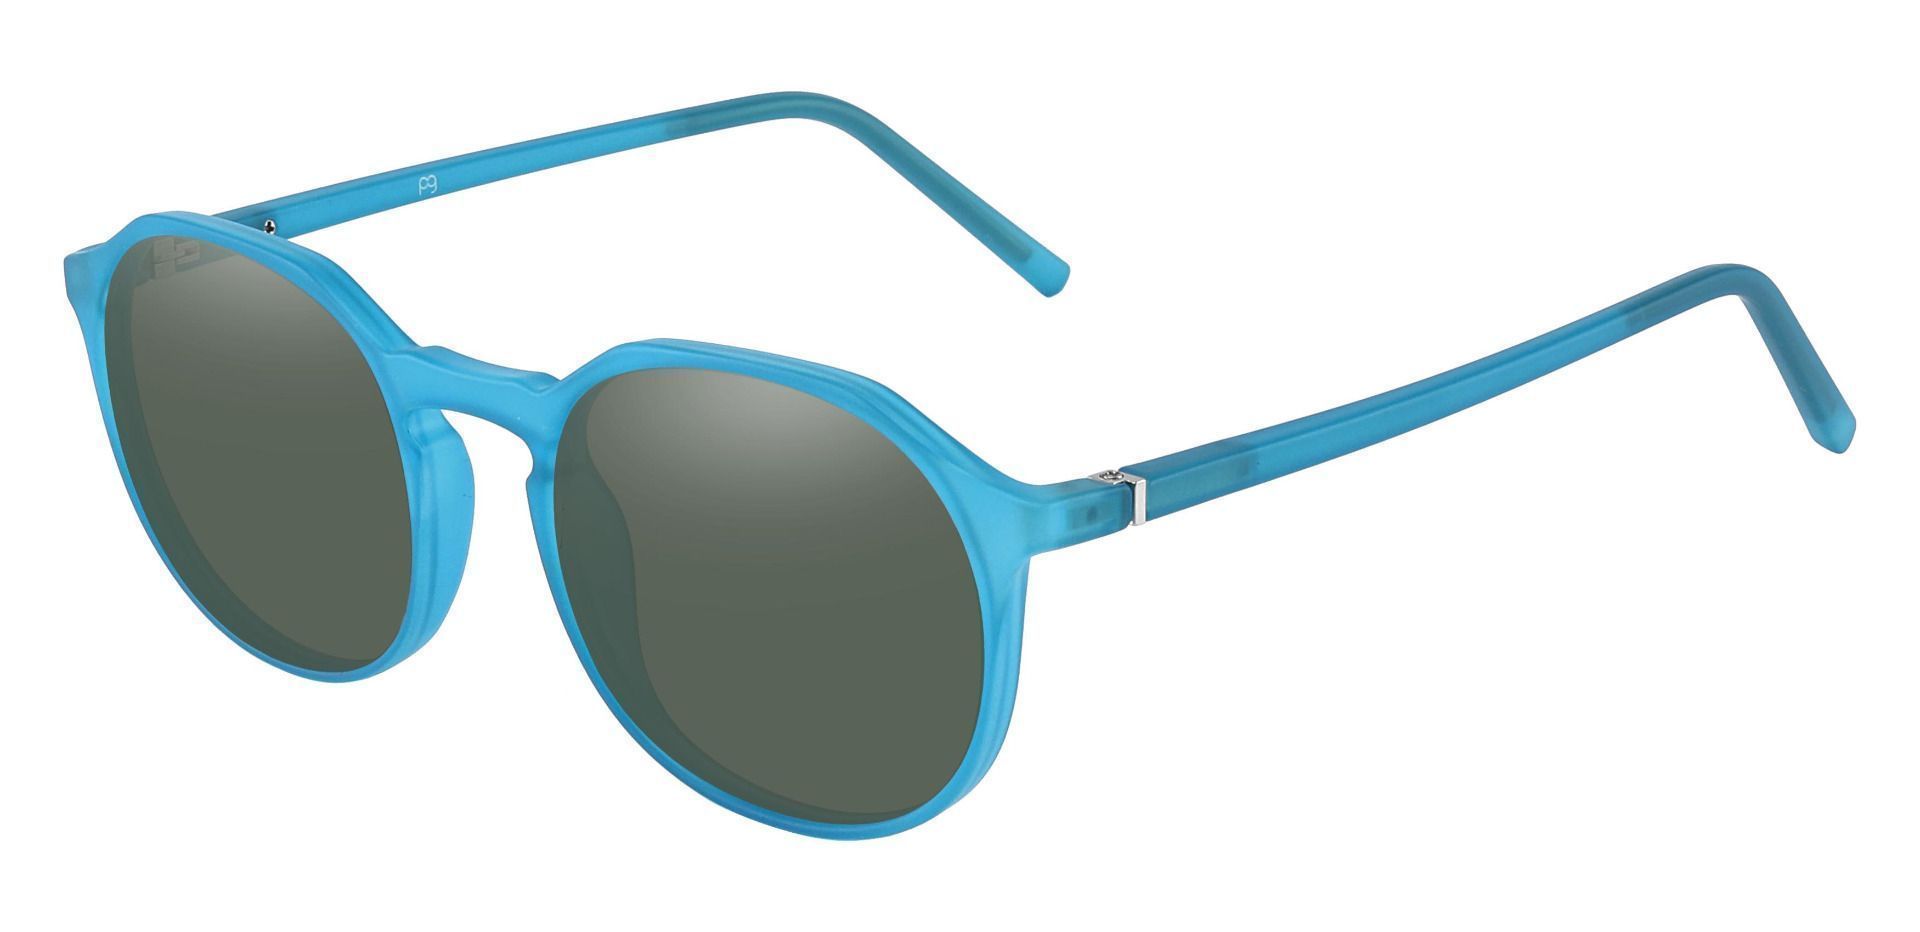 Belvidere Geometric Non-Rx Sunglasses - Blue Frame With Green Lenses